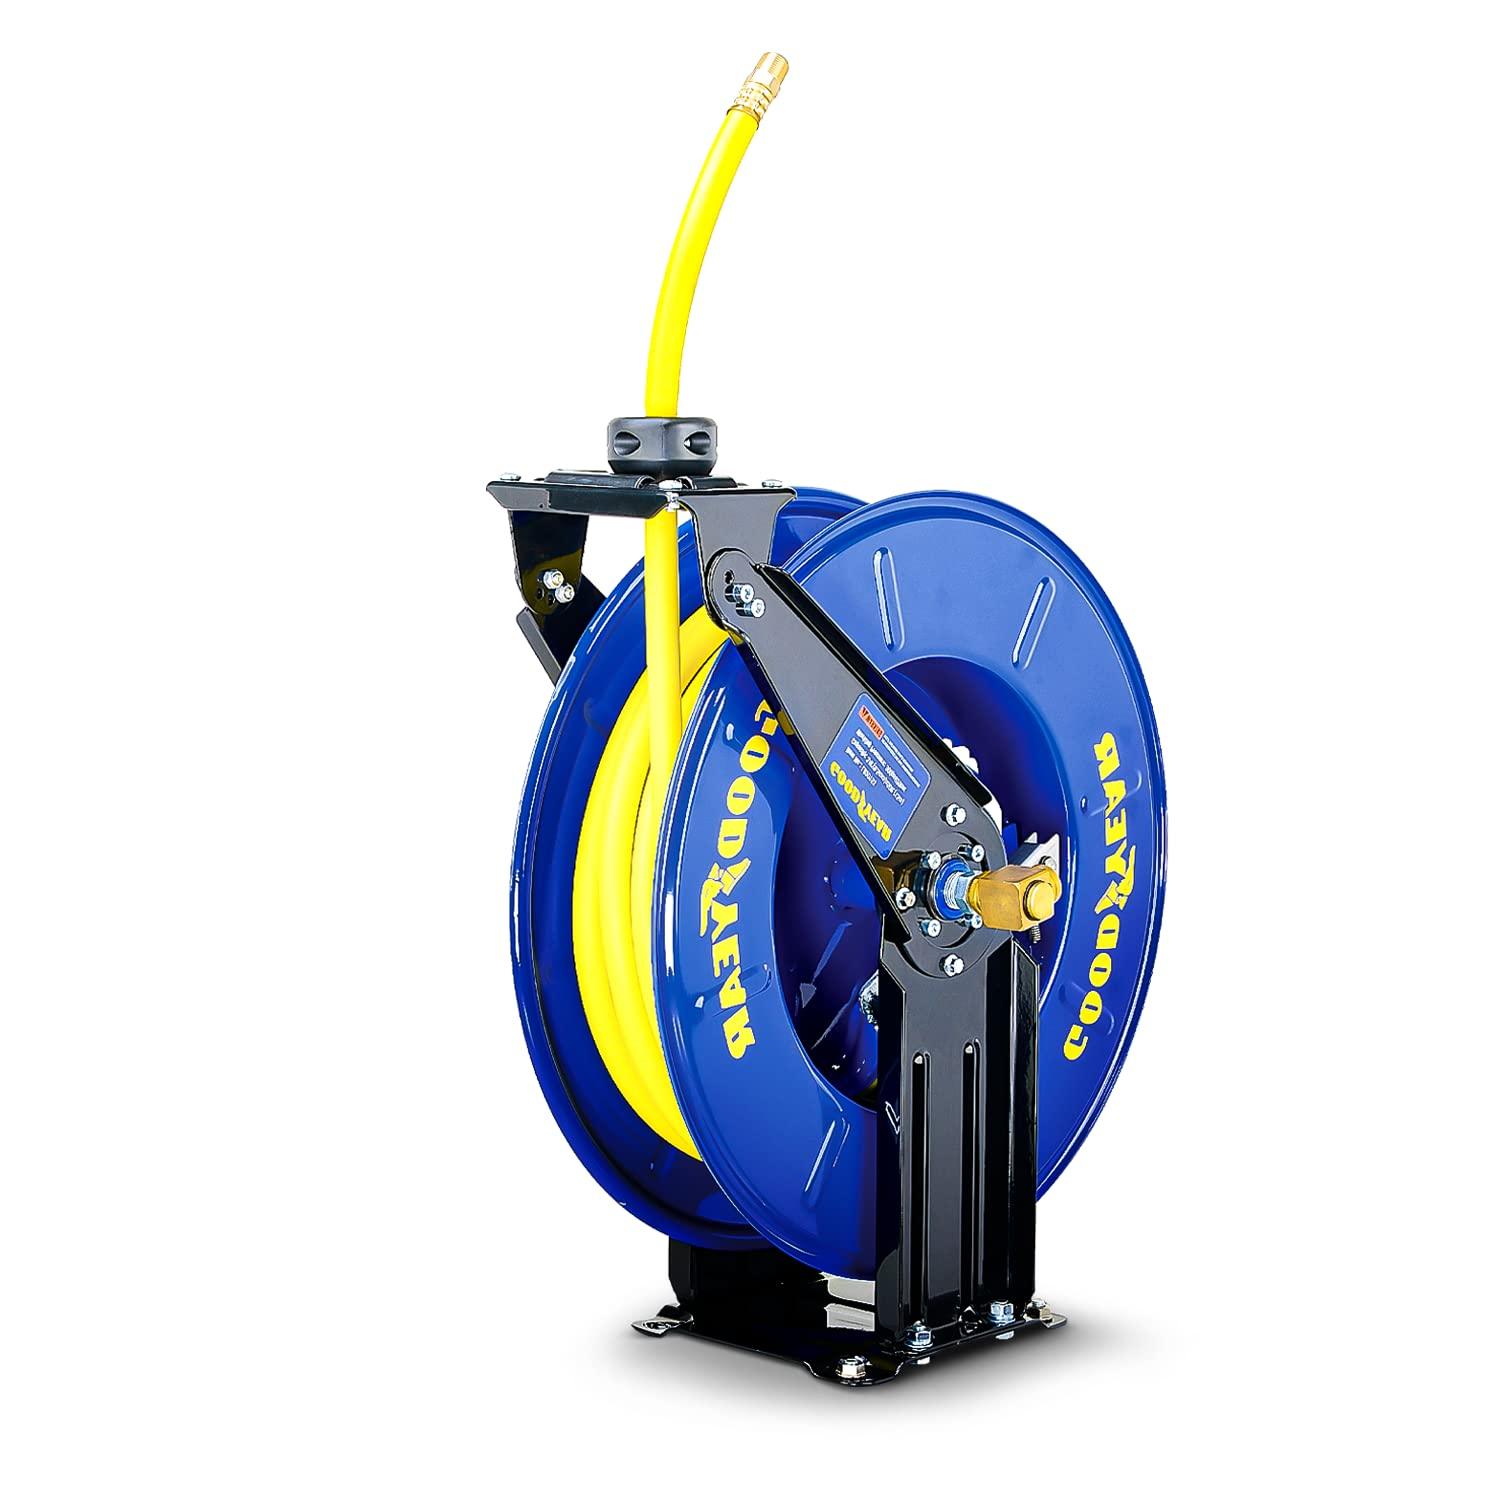 Goodyear Industrial Retractable Air Hose Reel - 1/2" x 50' Ft, 300 PSI Max, 1/2" NPT Connections, Dual Arm - DIY Tools by GreatCircleUS